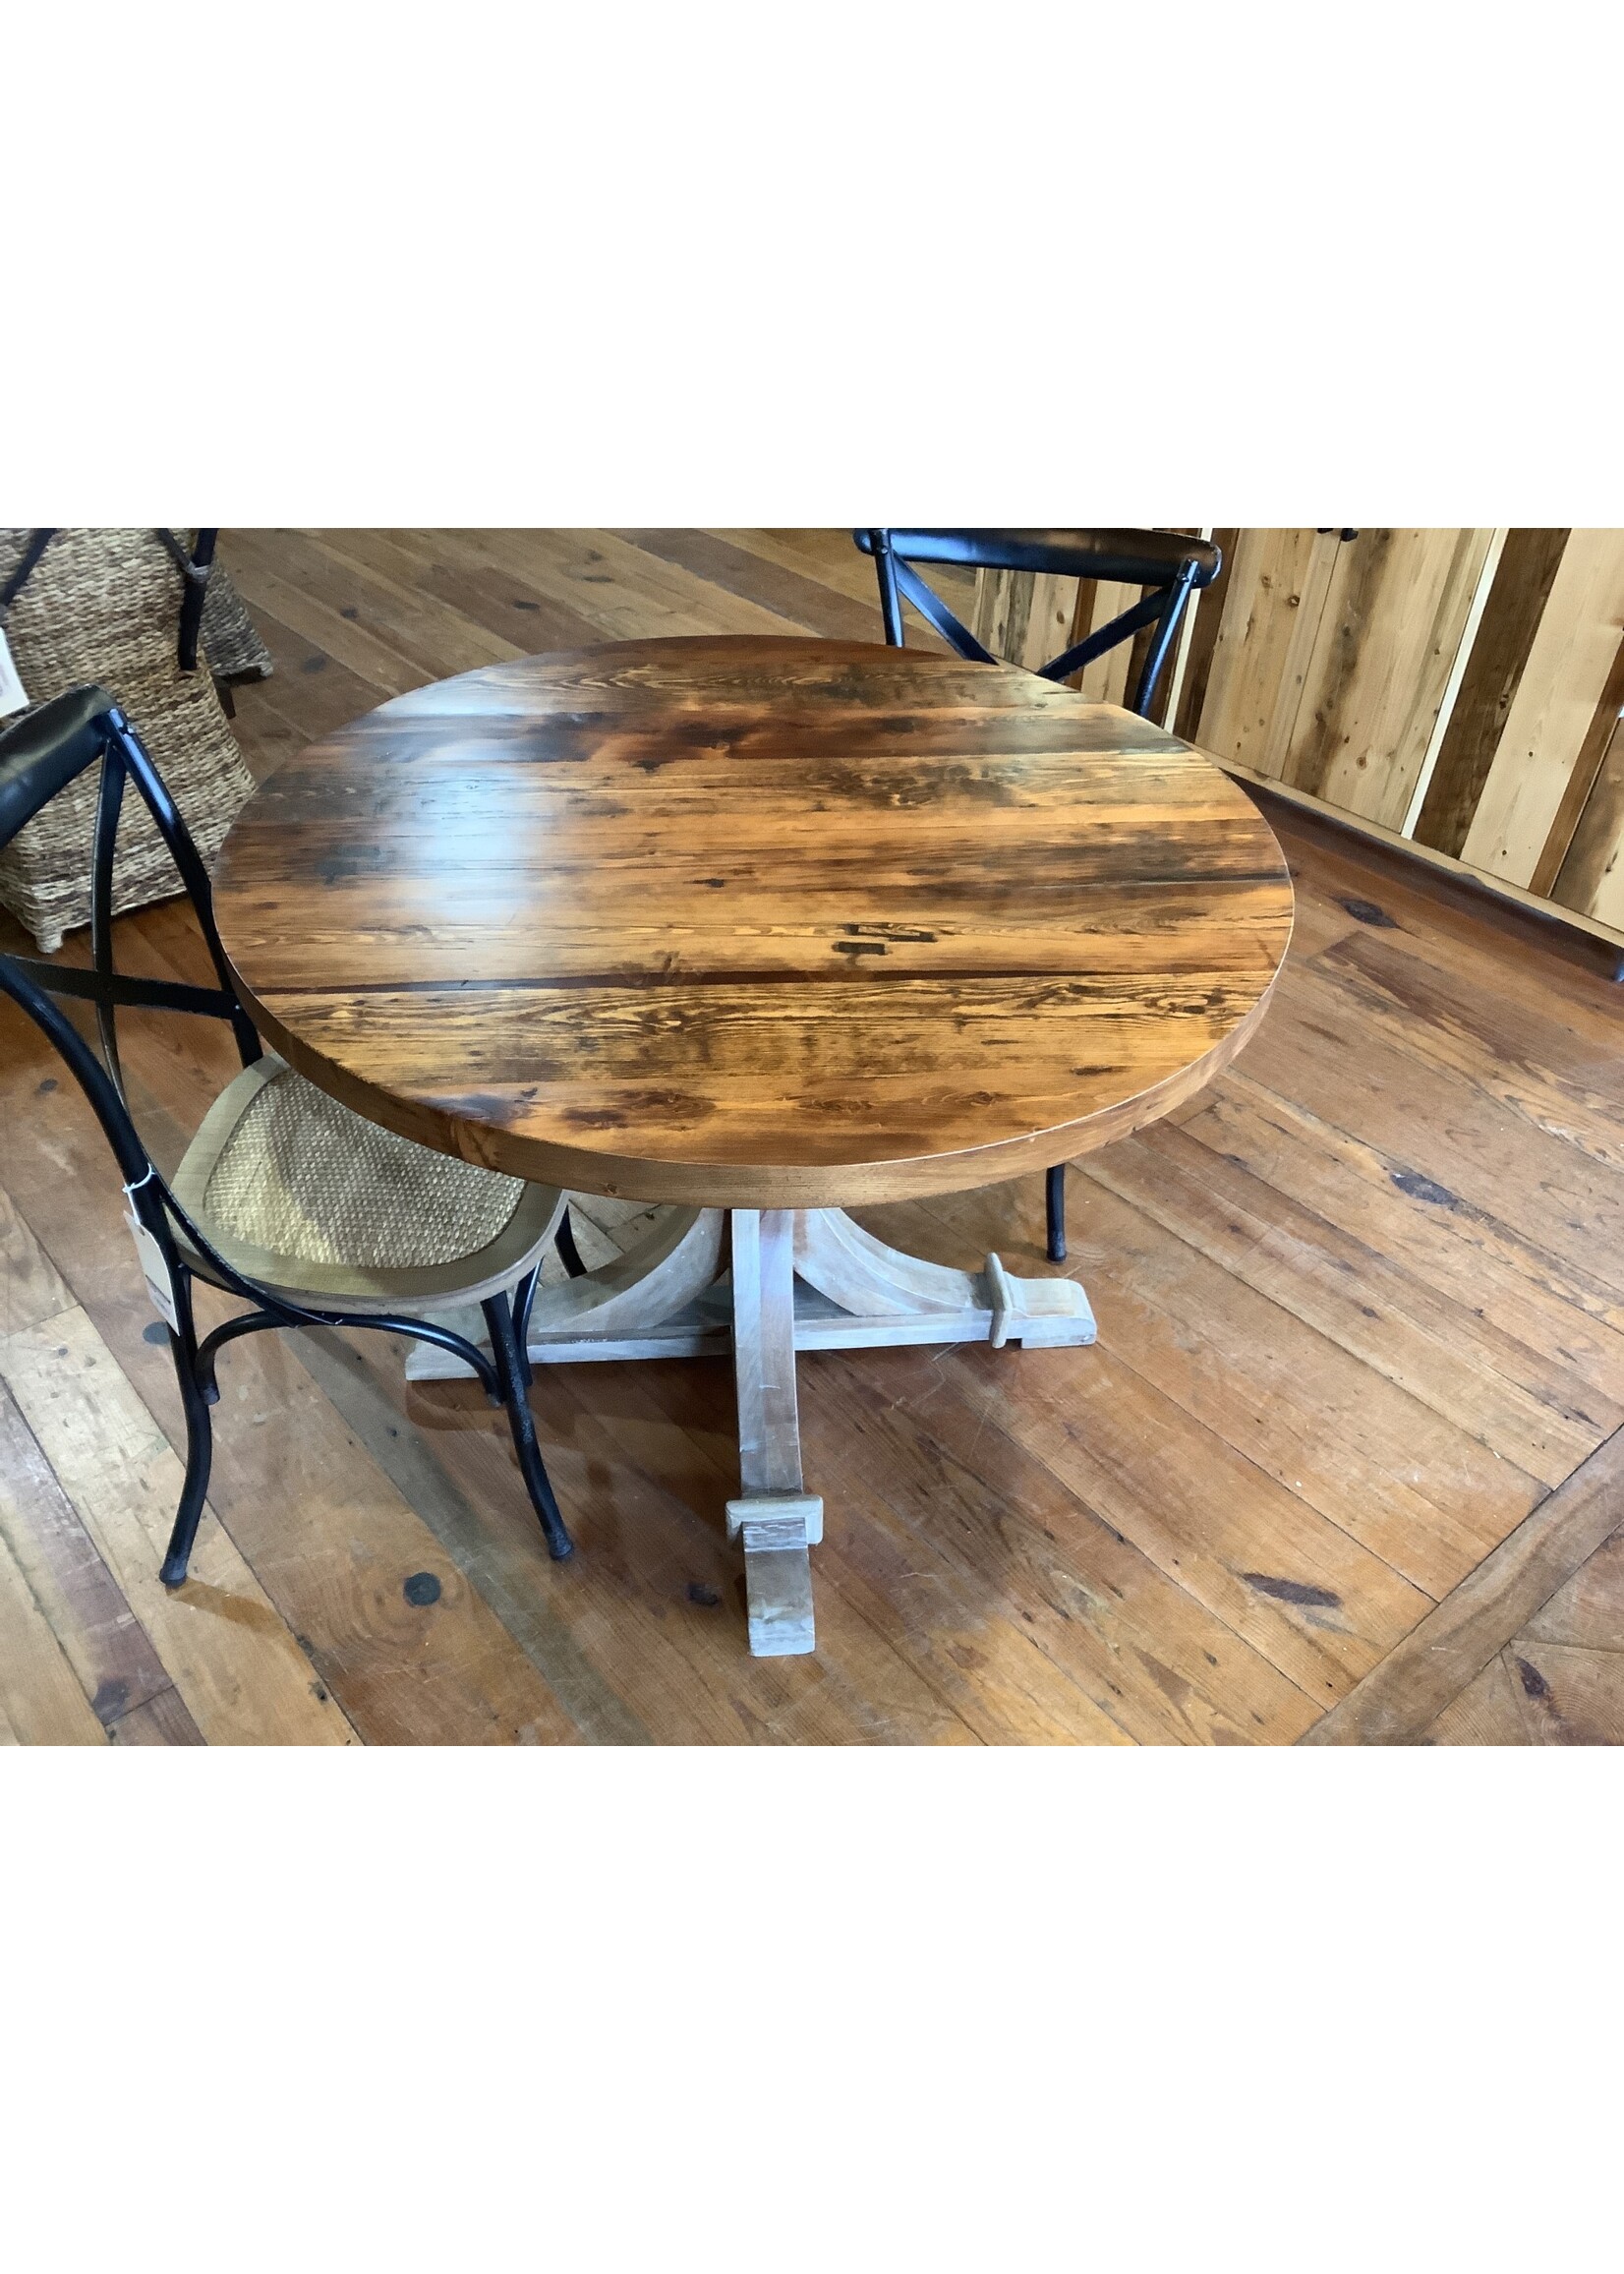 Old Wood Delaware OW WPOF Early American Round Table 42"  Curved Base Gray Wash